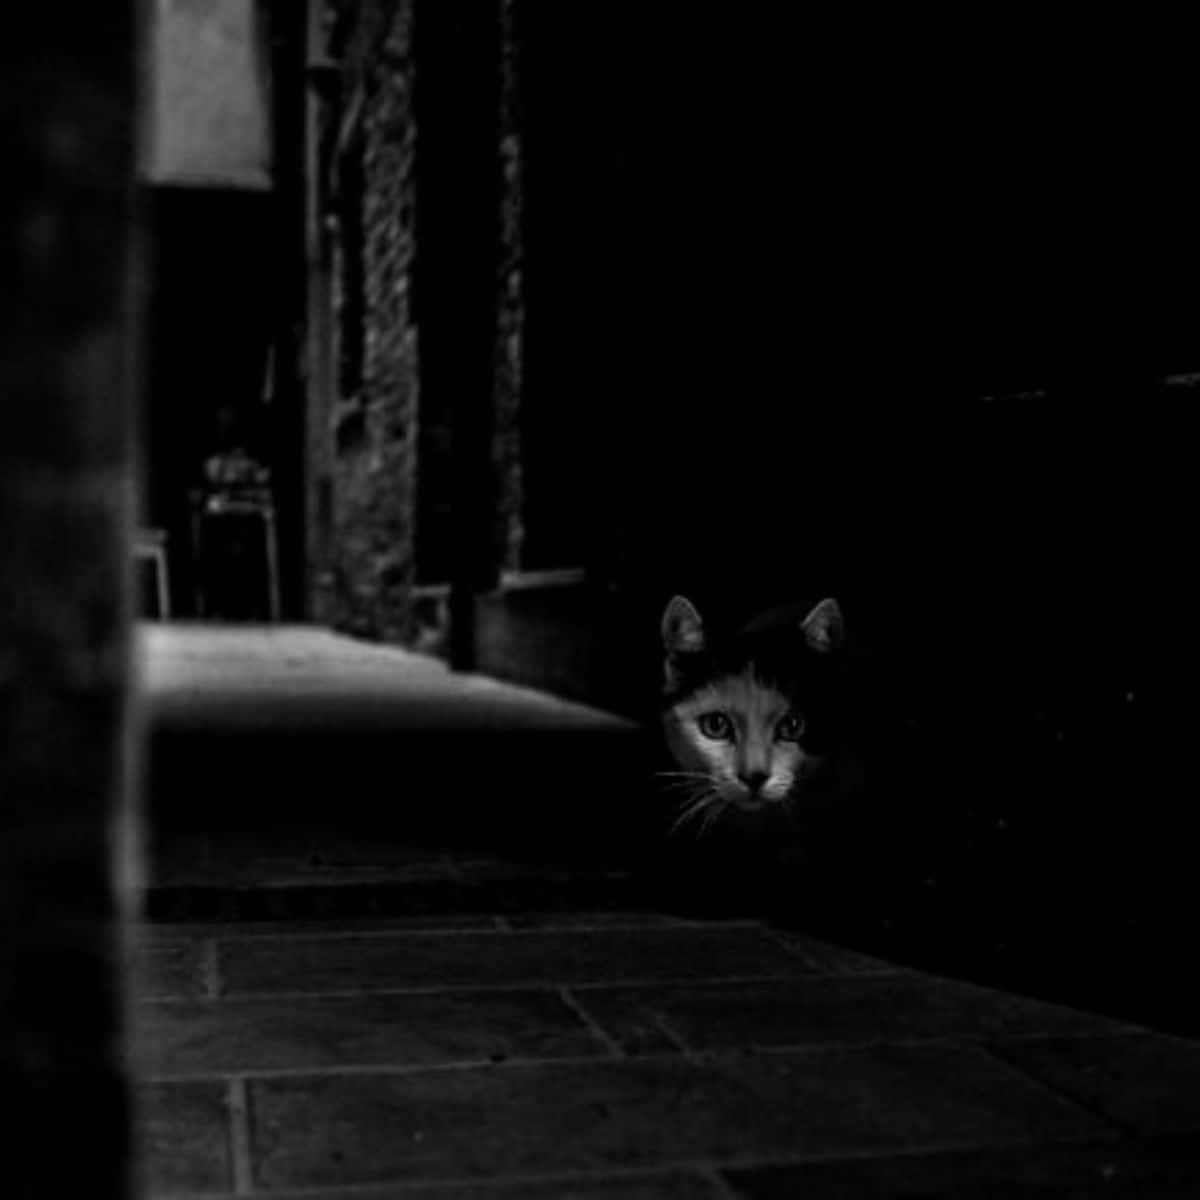 the cat is hiding in the dark on the street